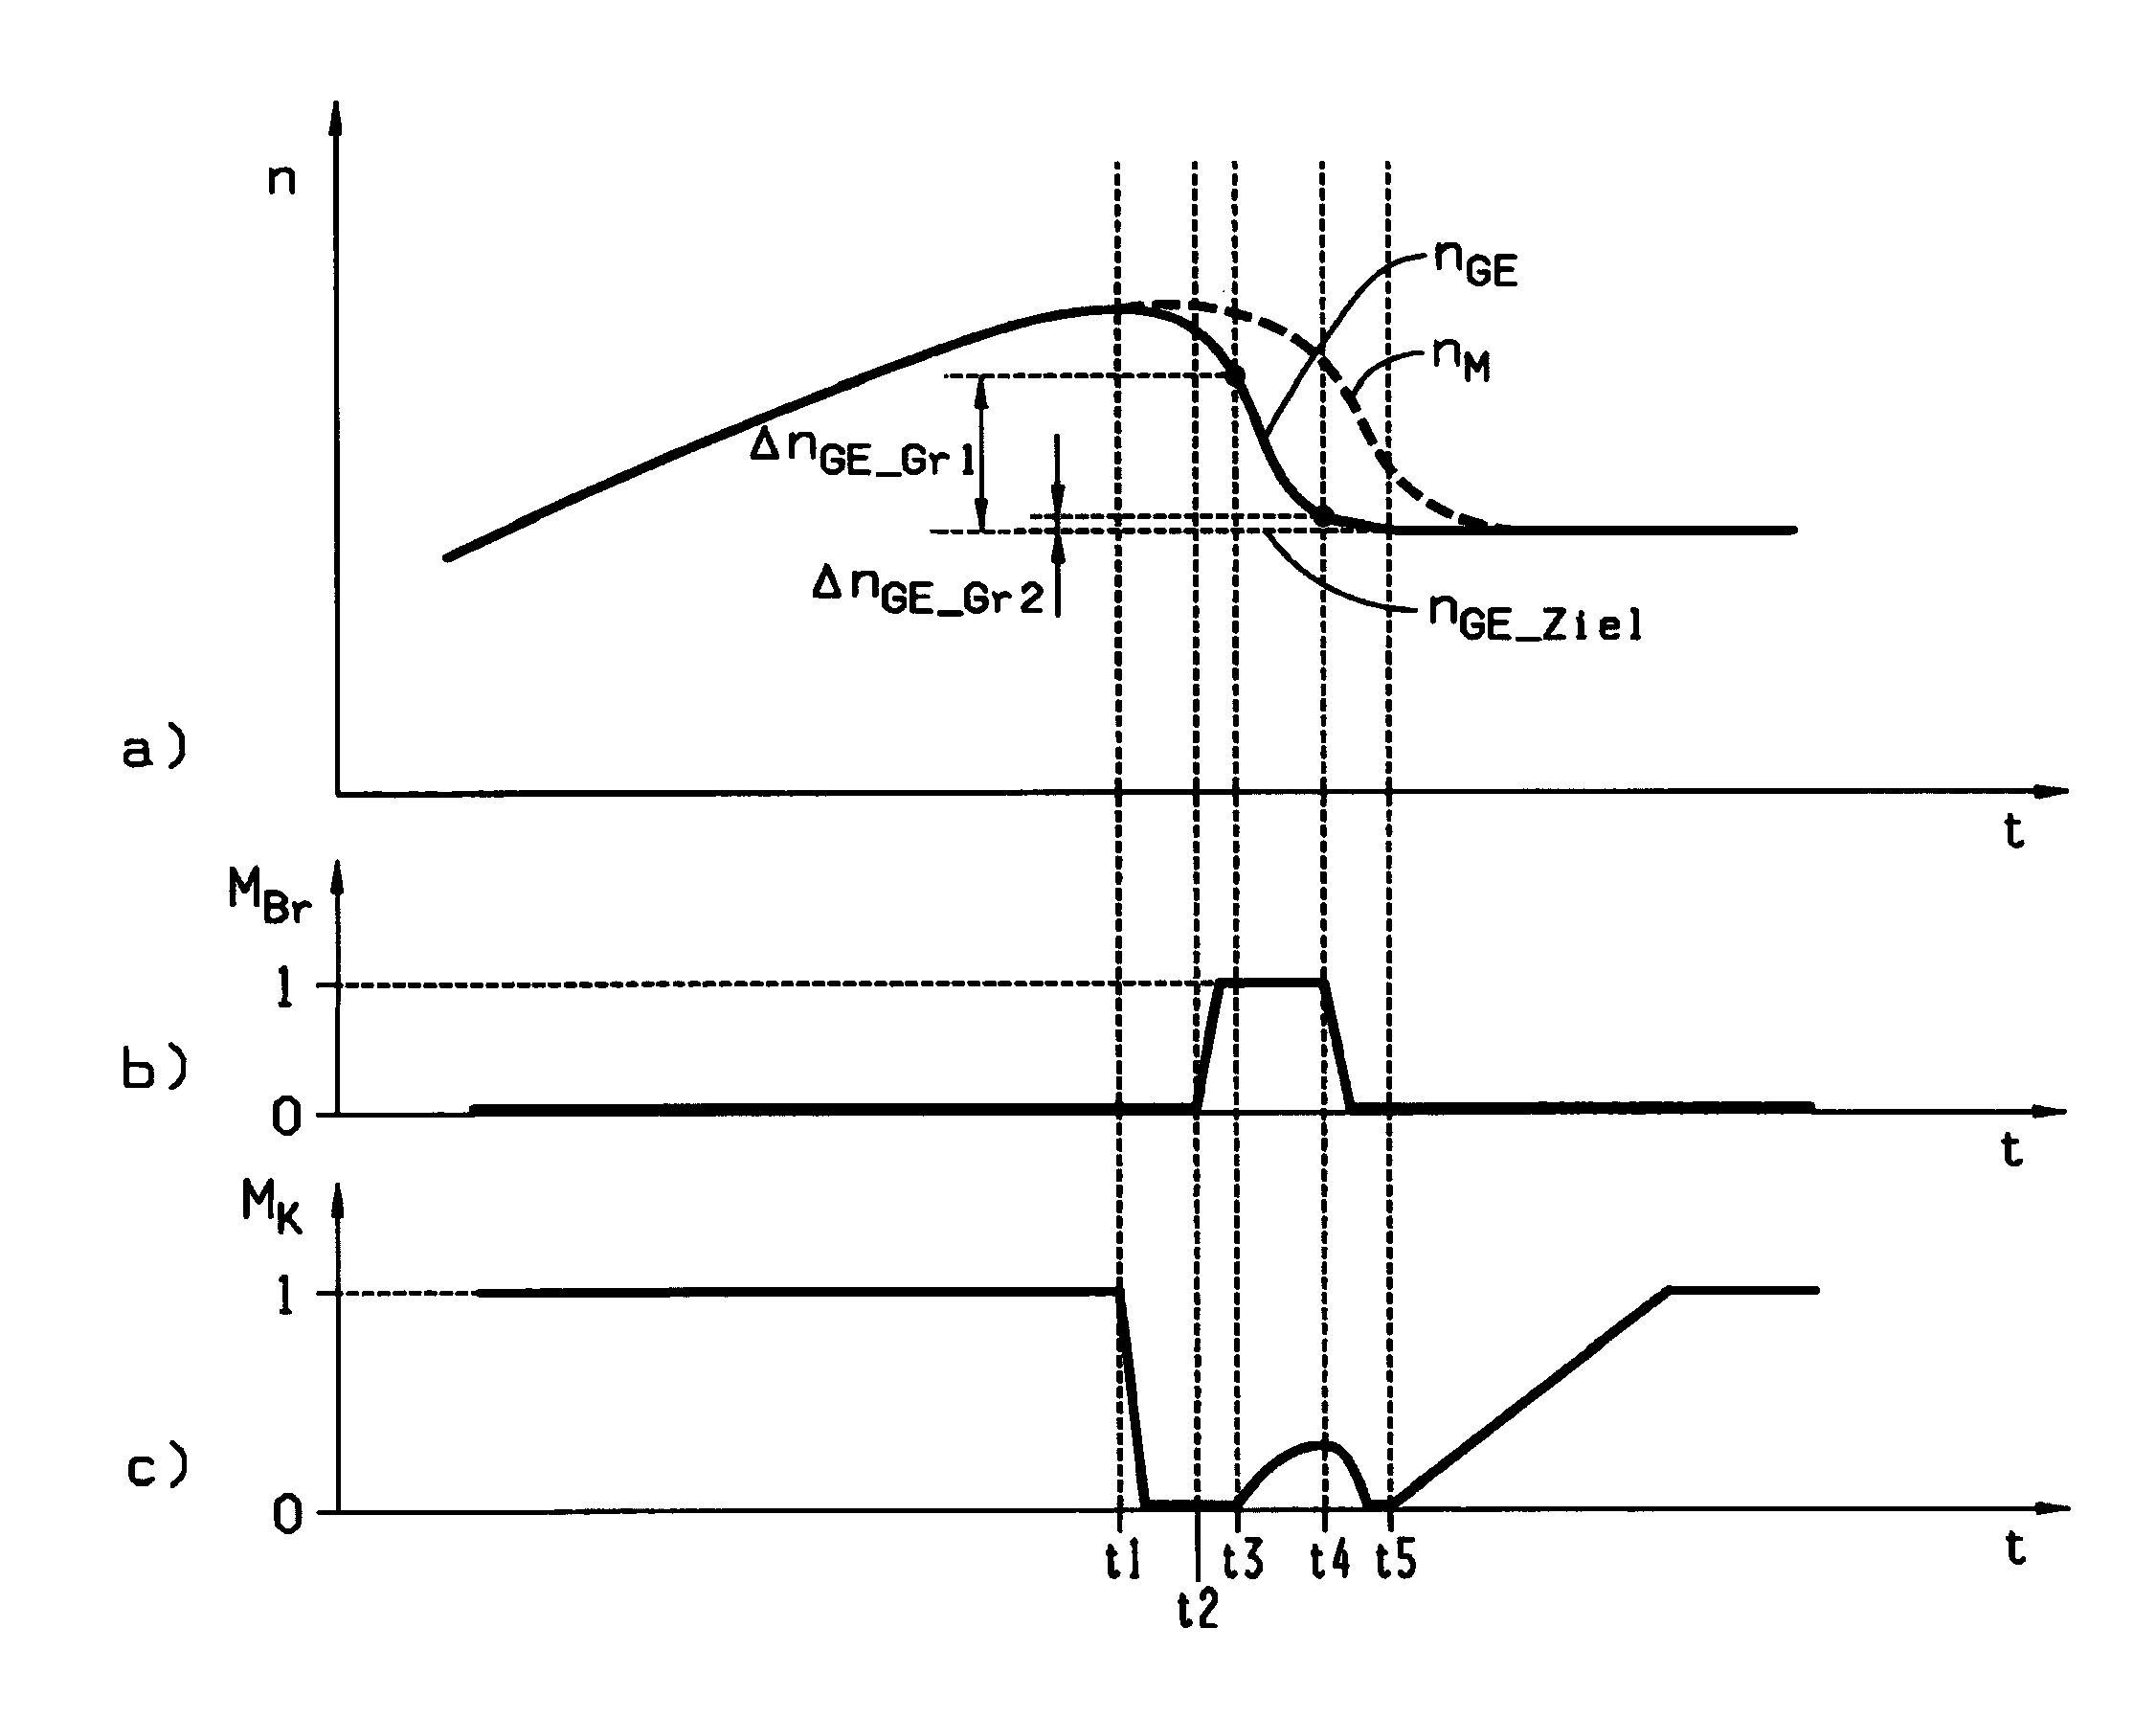 Shift control method in an automated manual transmission